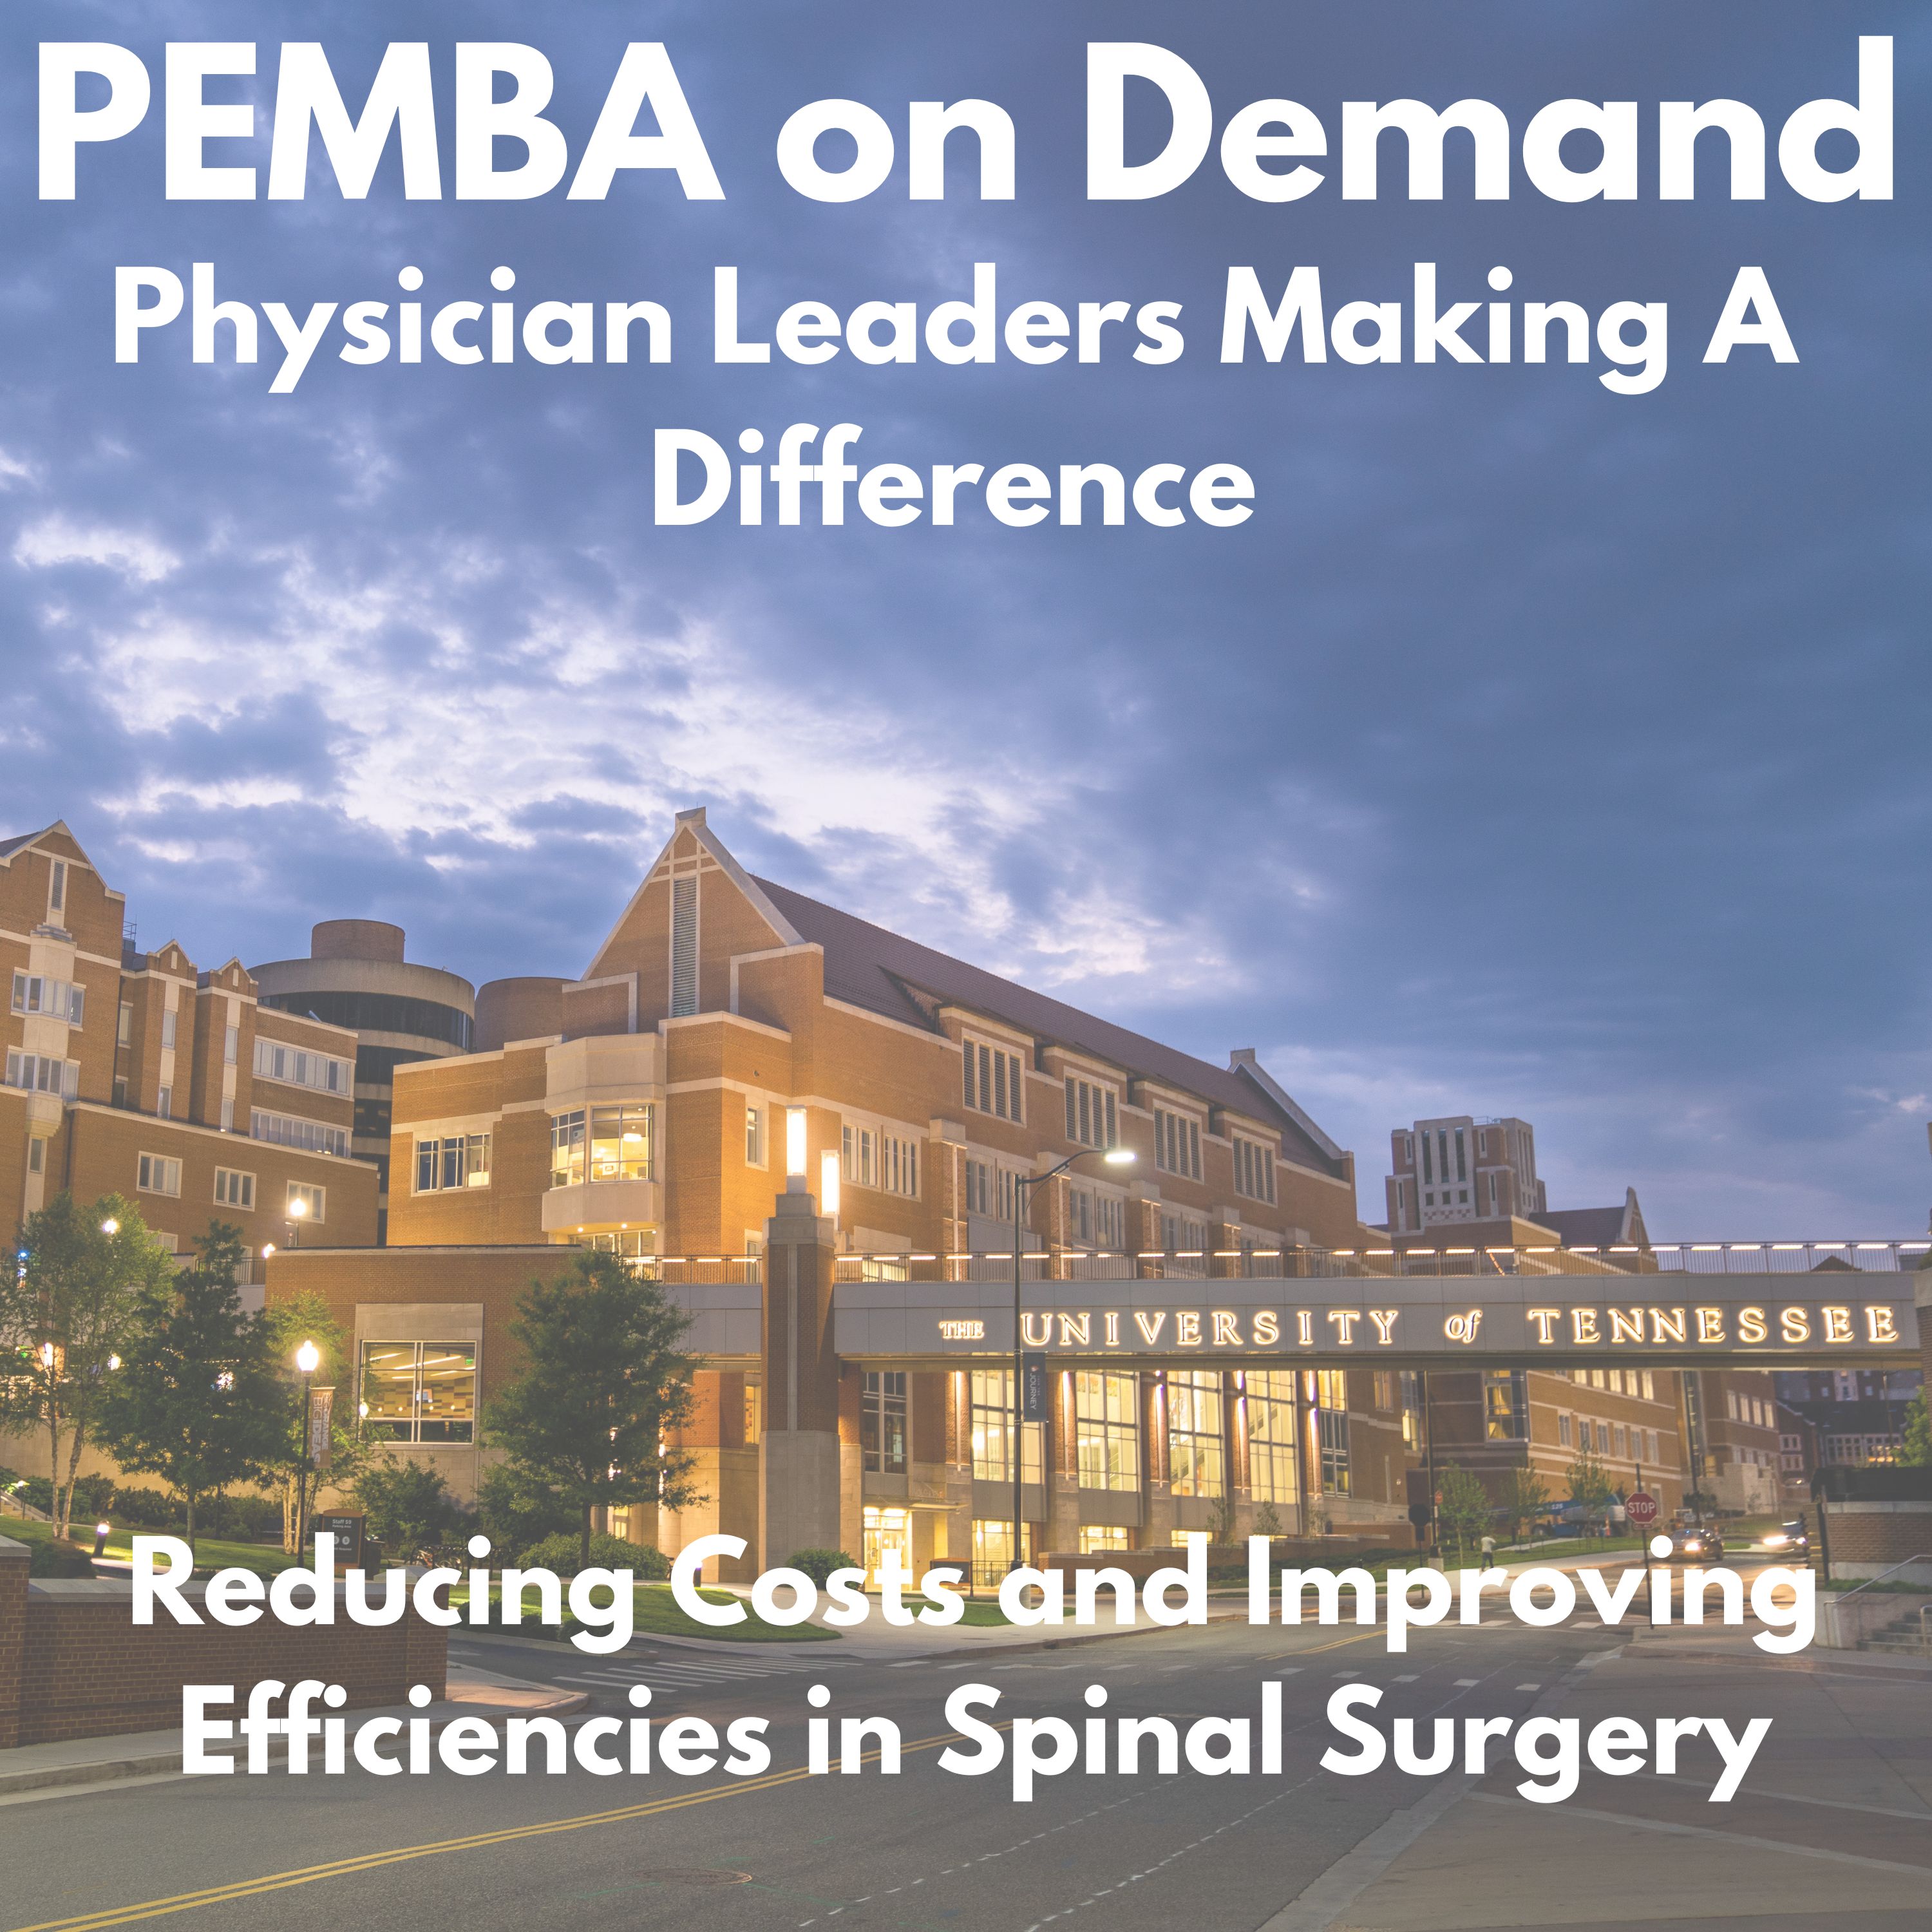 Reducing Costs and Improving Efficiencies is Spinal Surgery